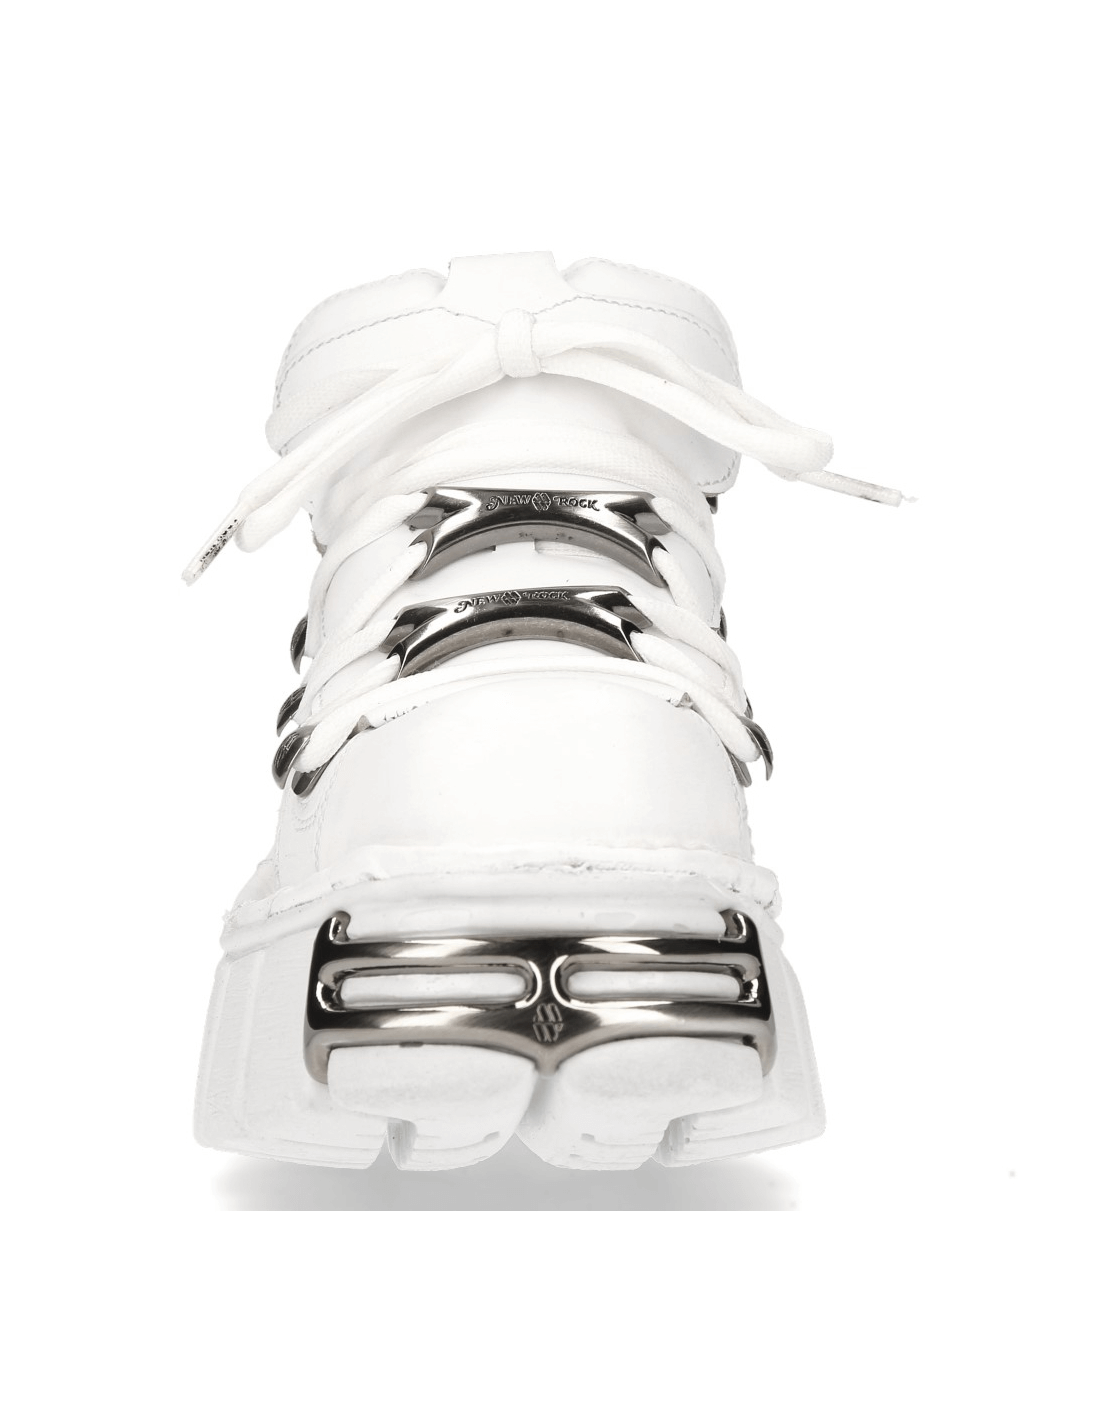 NEW ROCK White Punk Platform Boots with Metal Accents